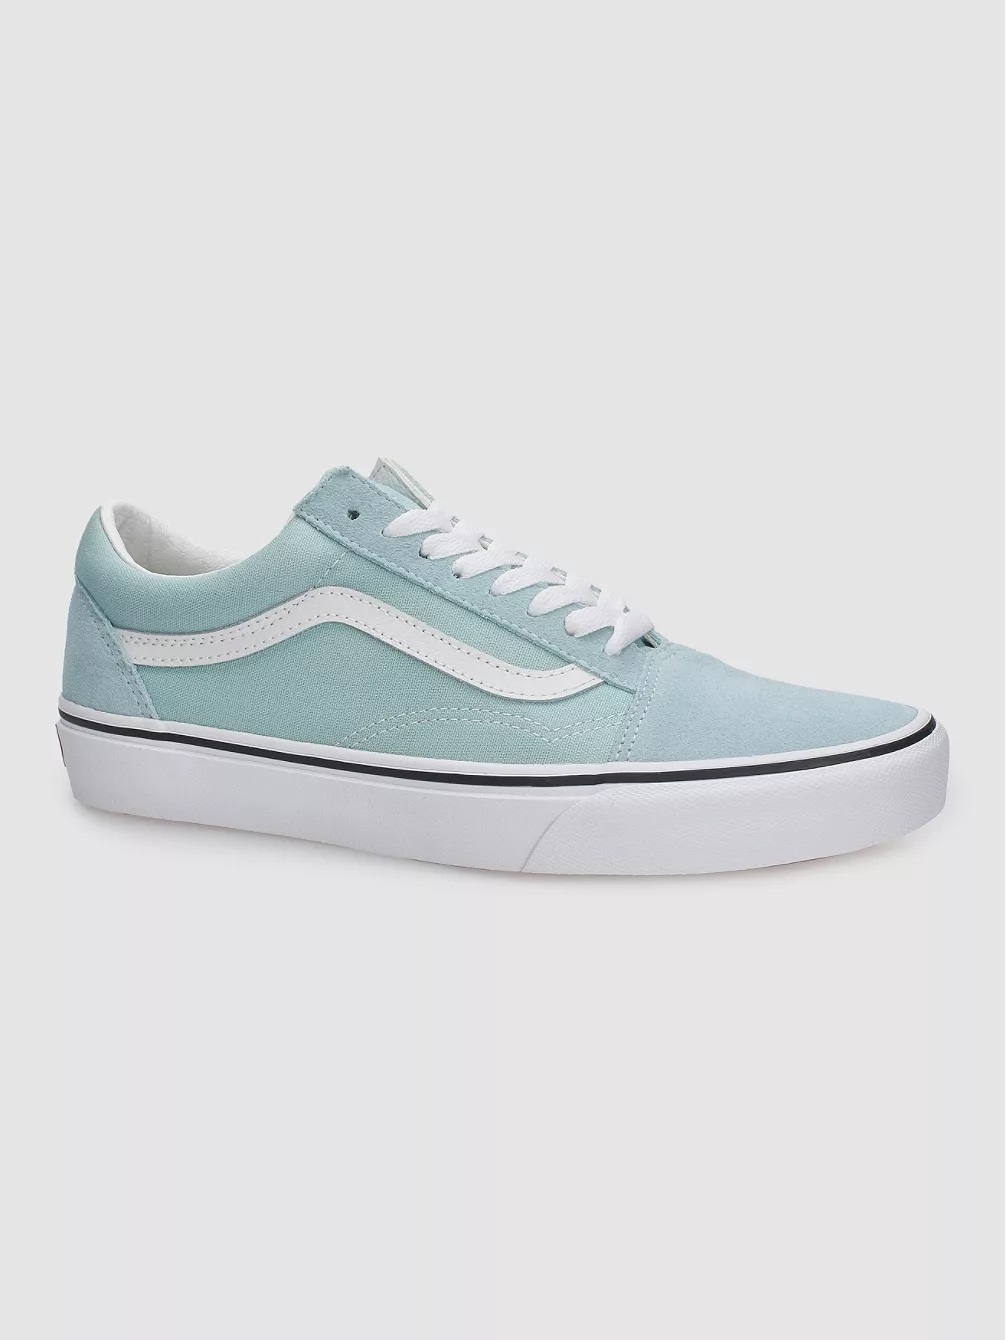 Tenisi Vans Old Skool Color Theory Canal Blue 37